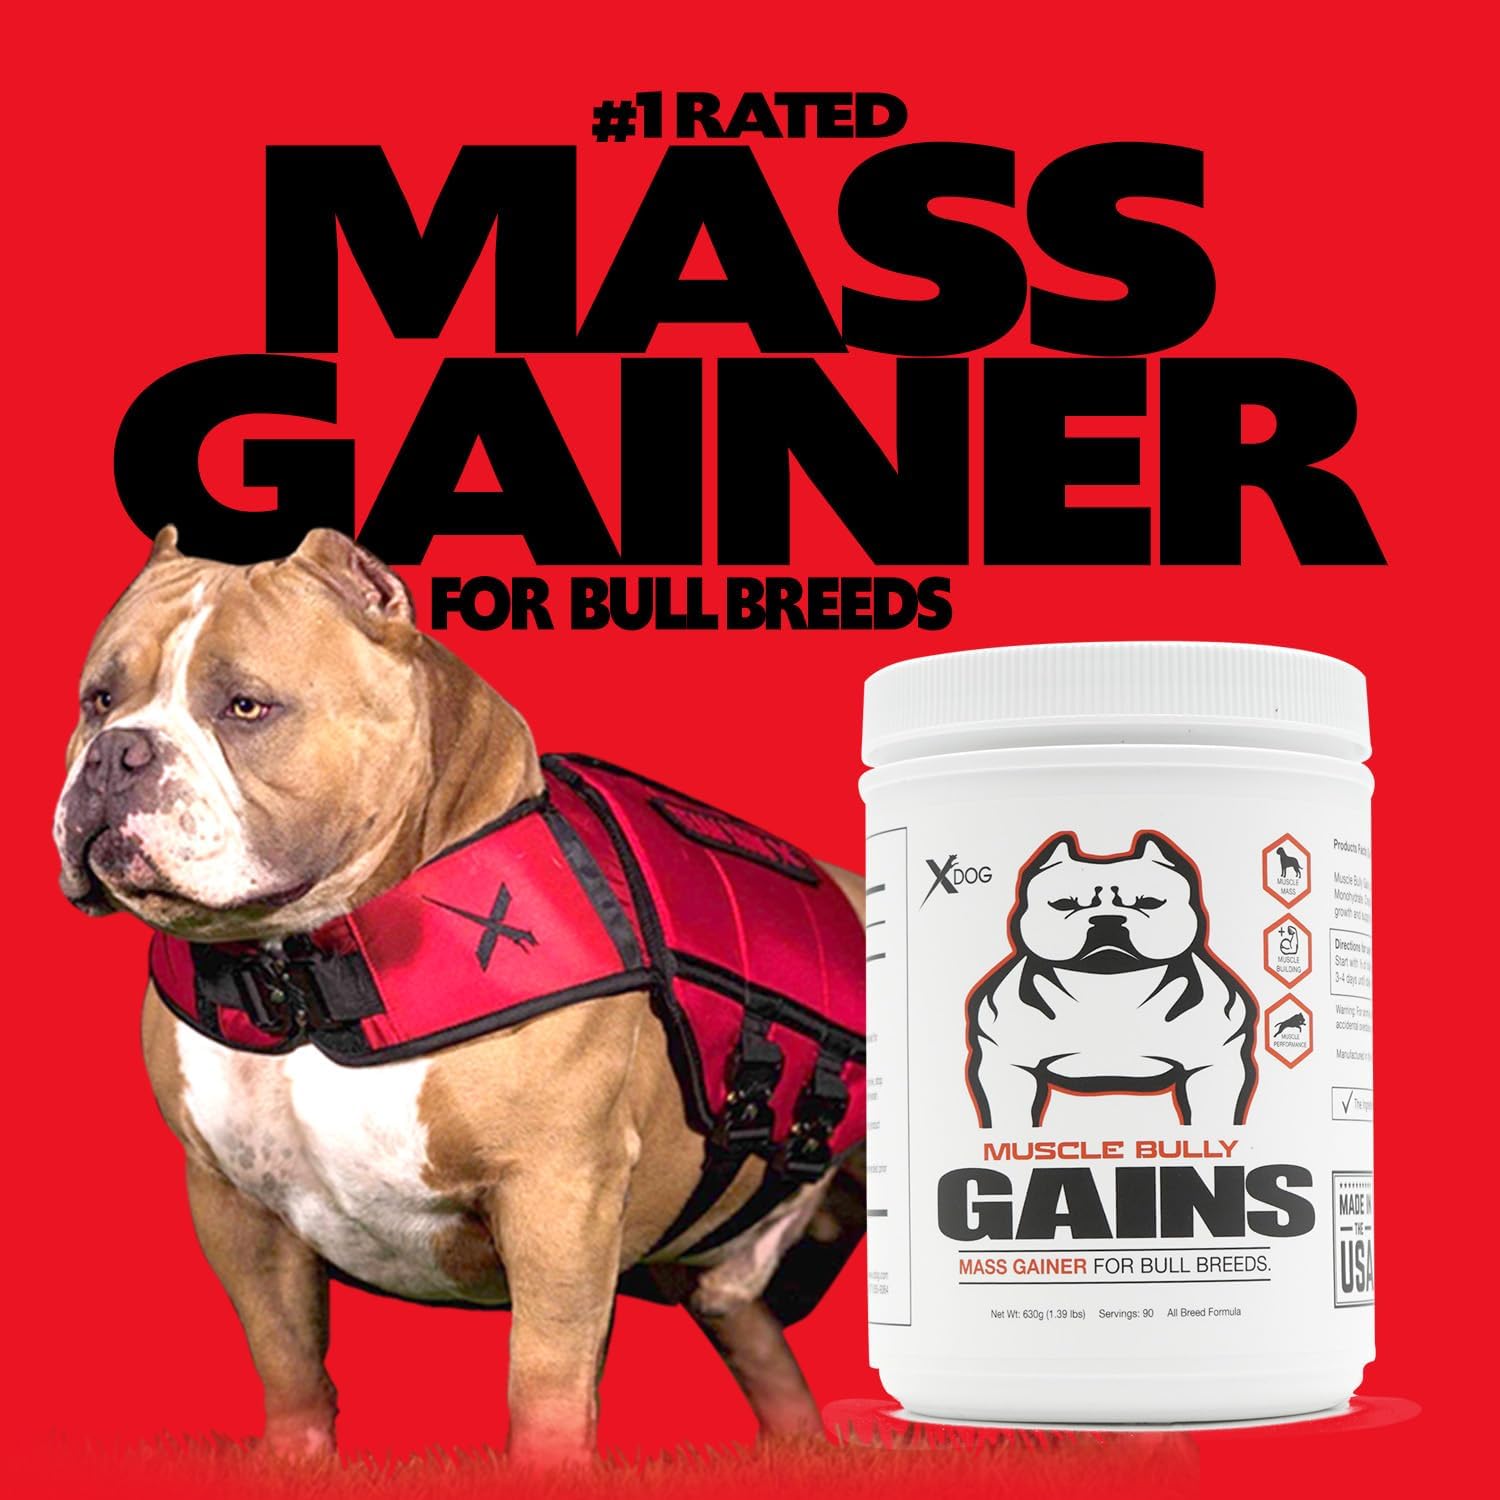 Muscle Bully Gains - Mass Weight Gainer for Dogs, Whey Protein, Flax Seed (for Bull Breeds, Pit Bulls, Bullies) Increase Healthy Natural Weight, Made in The USA (90 Servings) : Pet Supplies